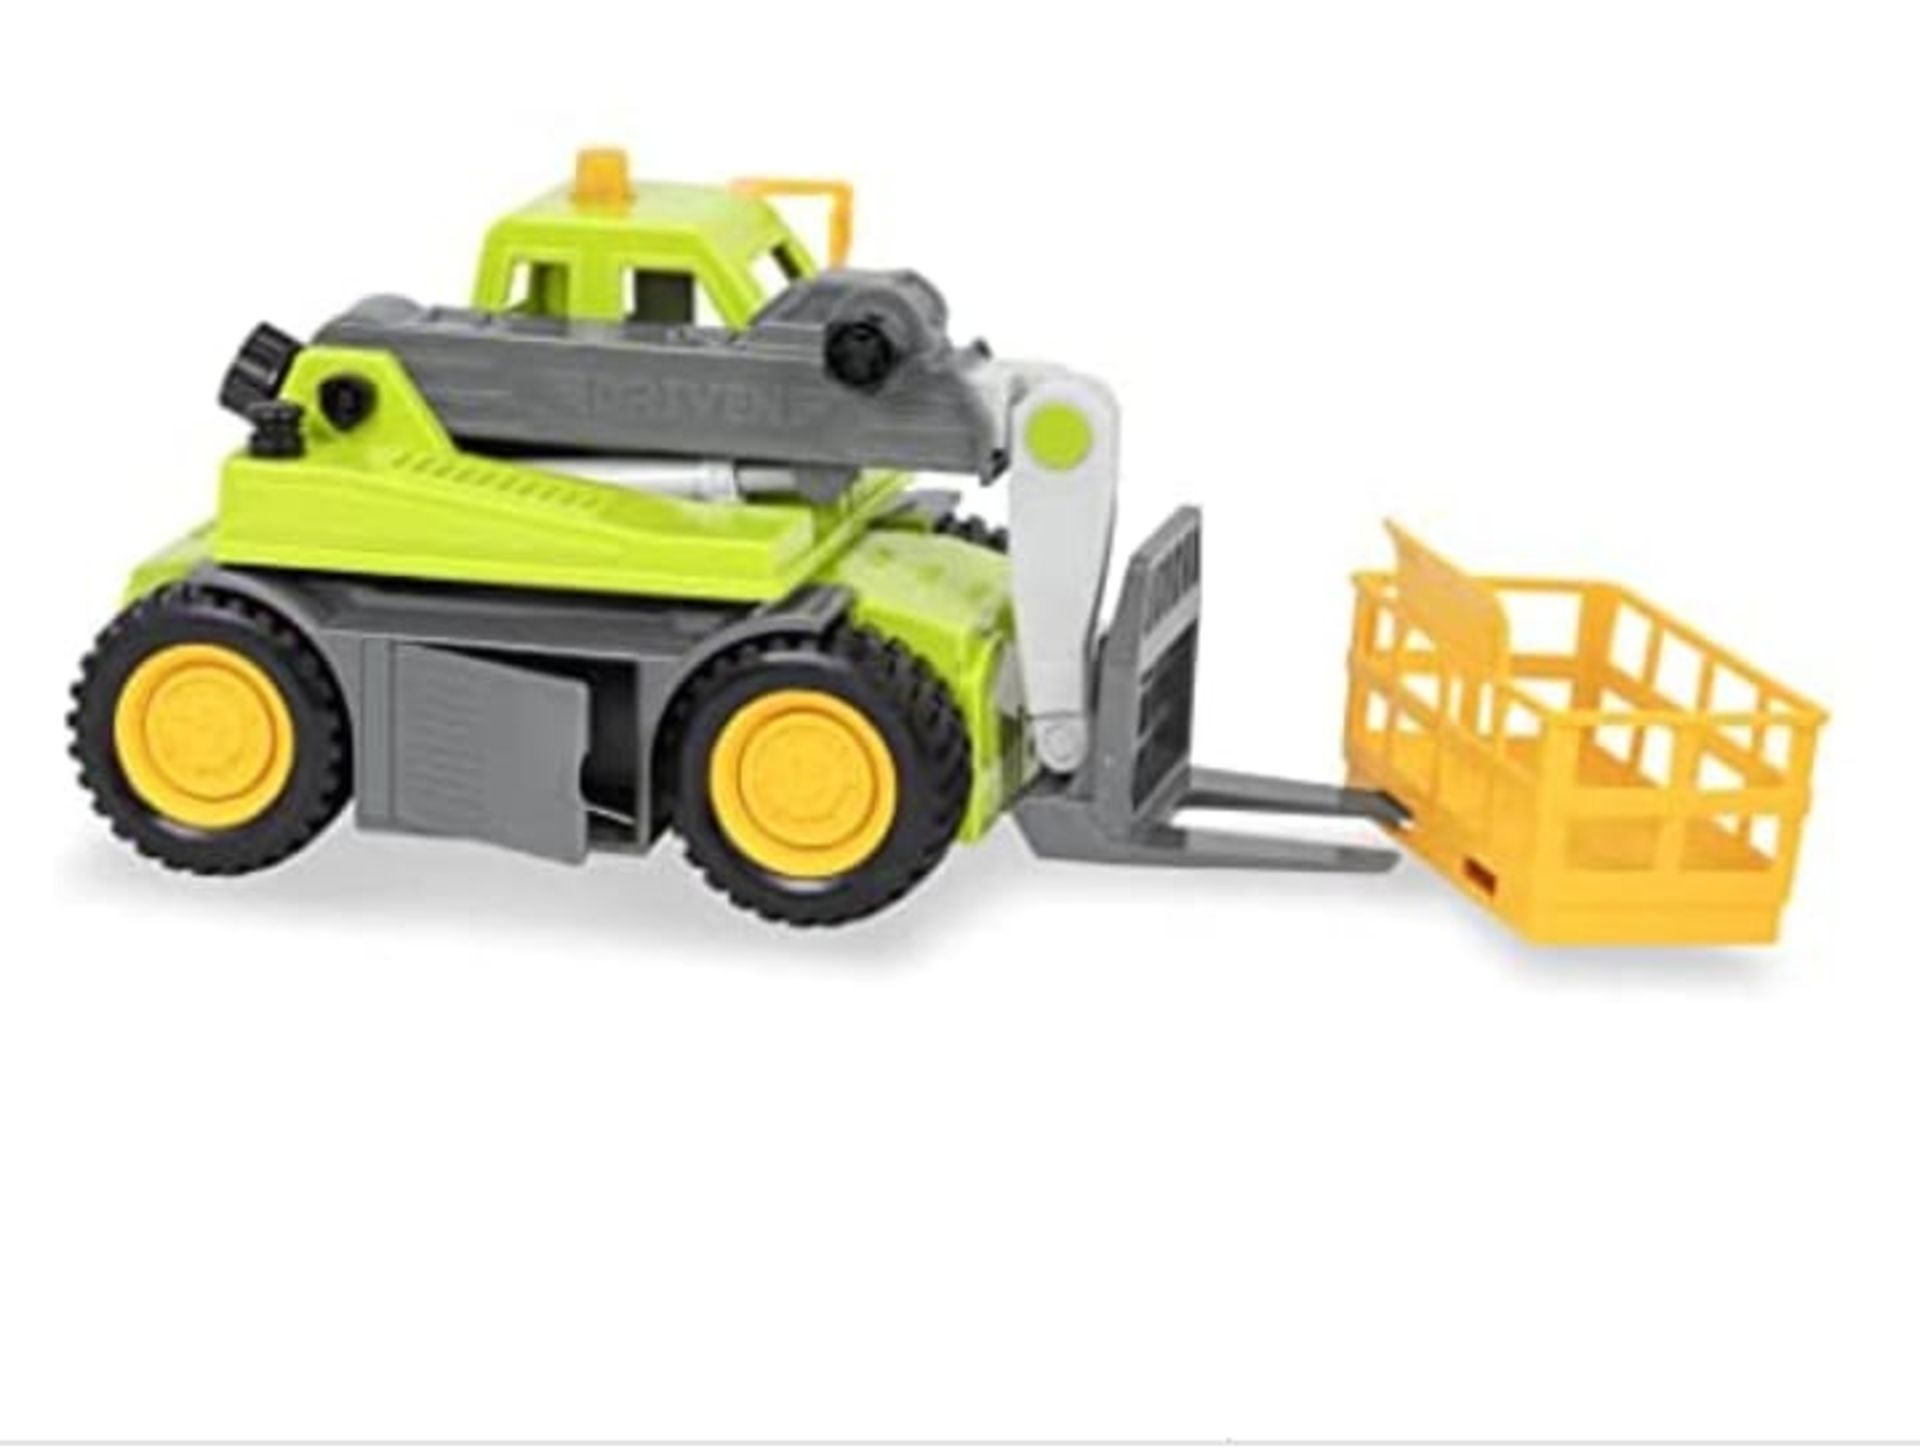 LARGE TELEHANDLER TRUCK WITH SOUNDS & FLASHING LIGHT APPROX 22 X 45CM